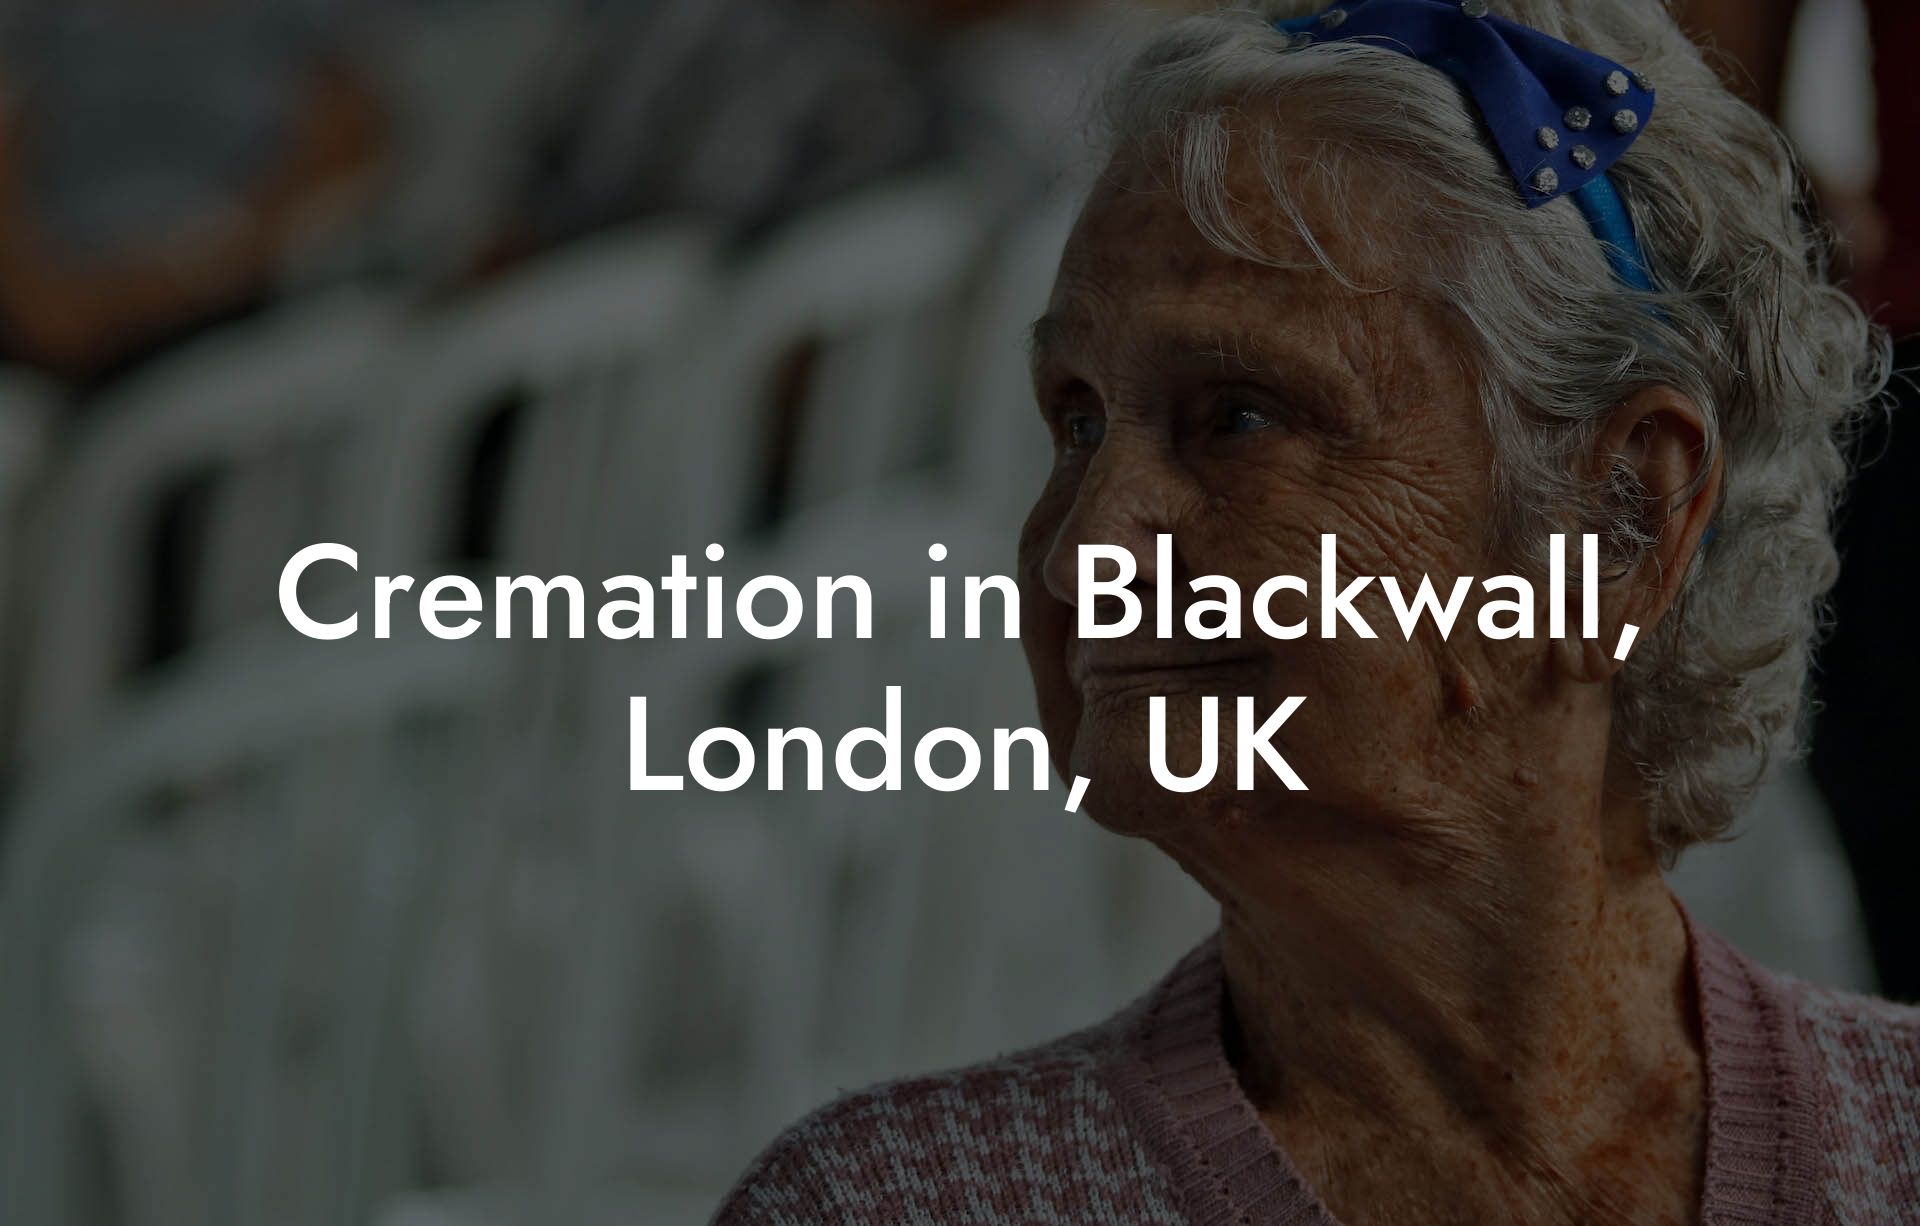 Cremation in Blackwall, London, UK